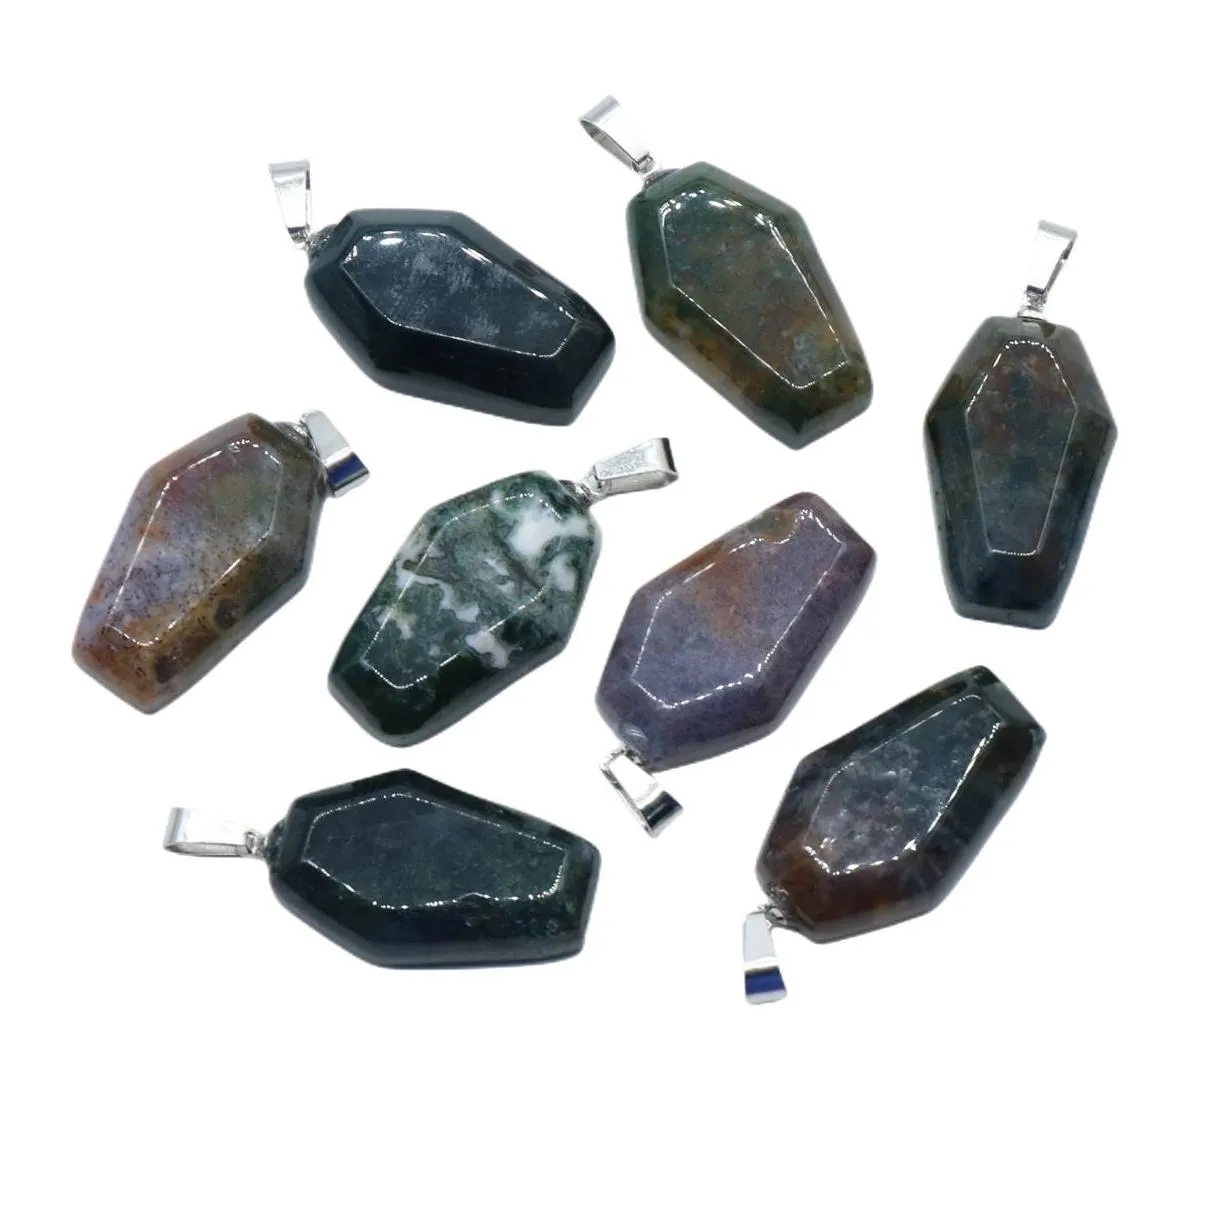 Wholesale Different Materials Jasper Crystal Coffin Shaped Gemstone Mini Carved Stone Women Men Gift